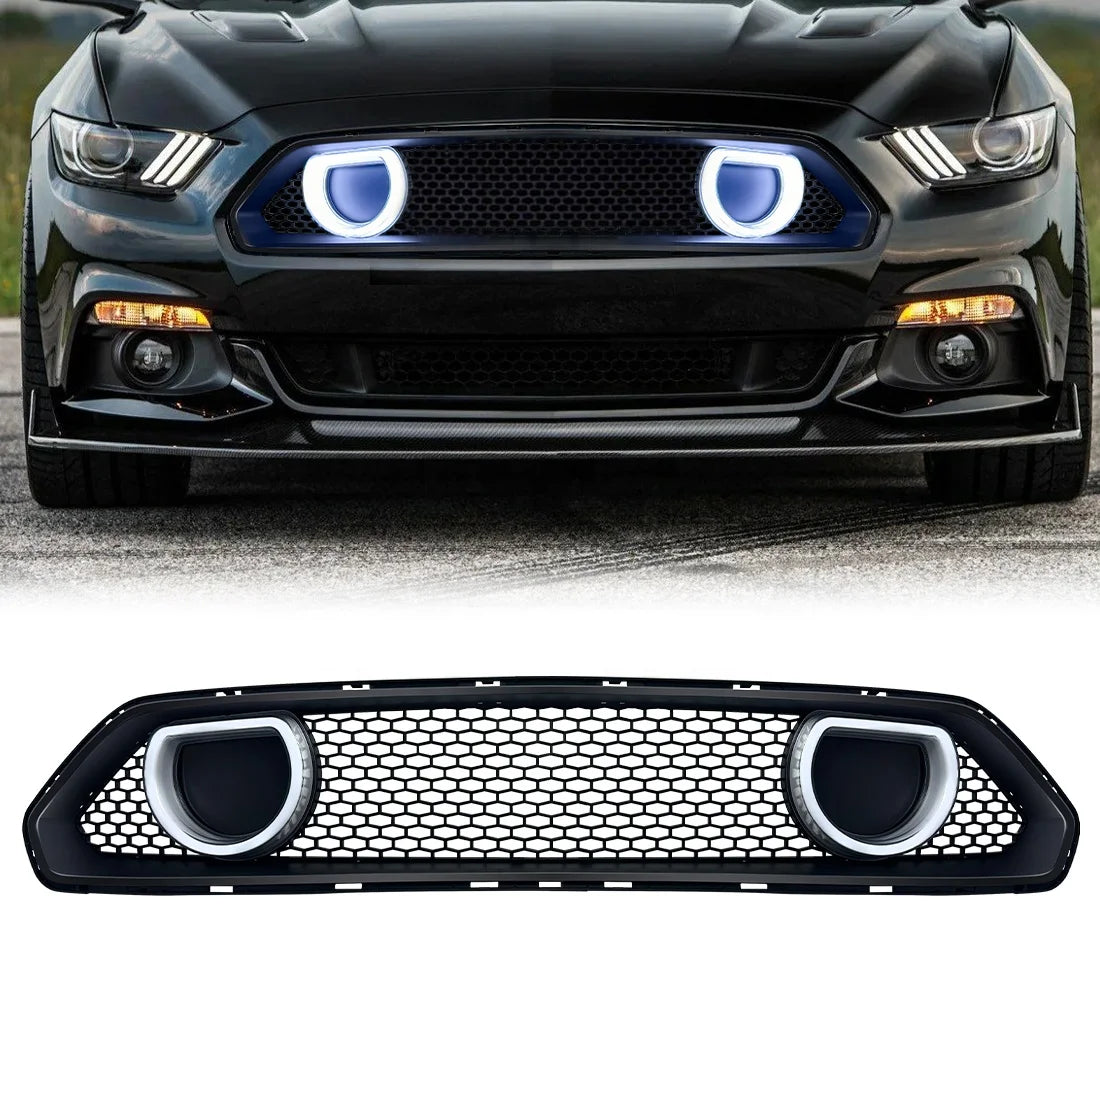 LED/DRL Mach 1 Style Front Grill For Mustang